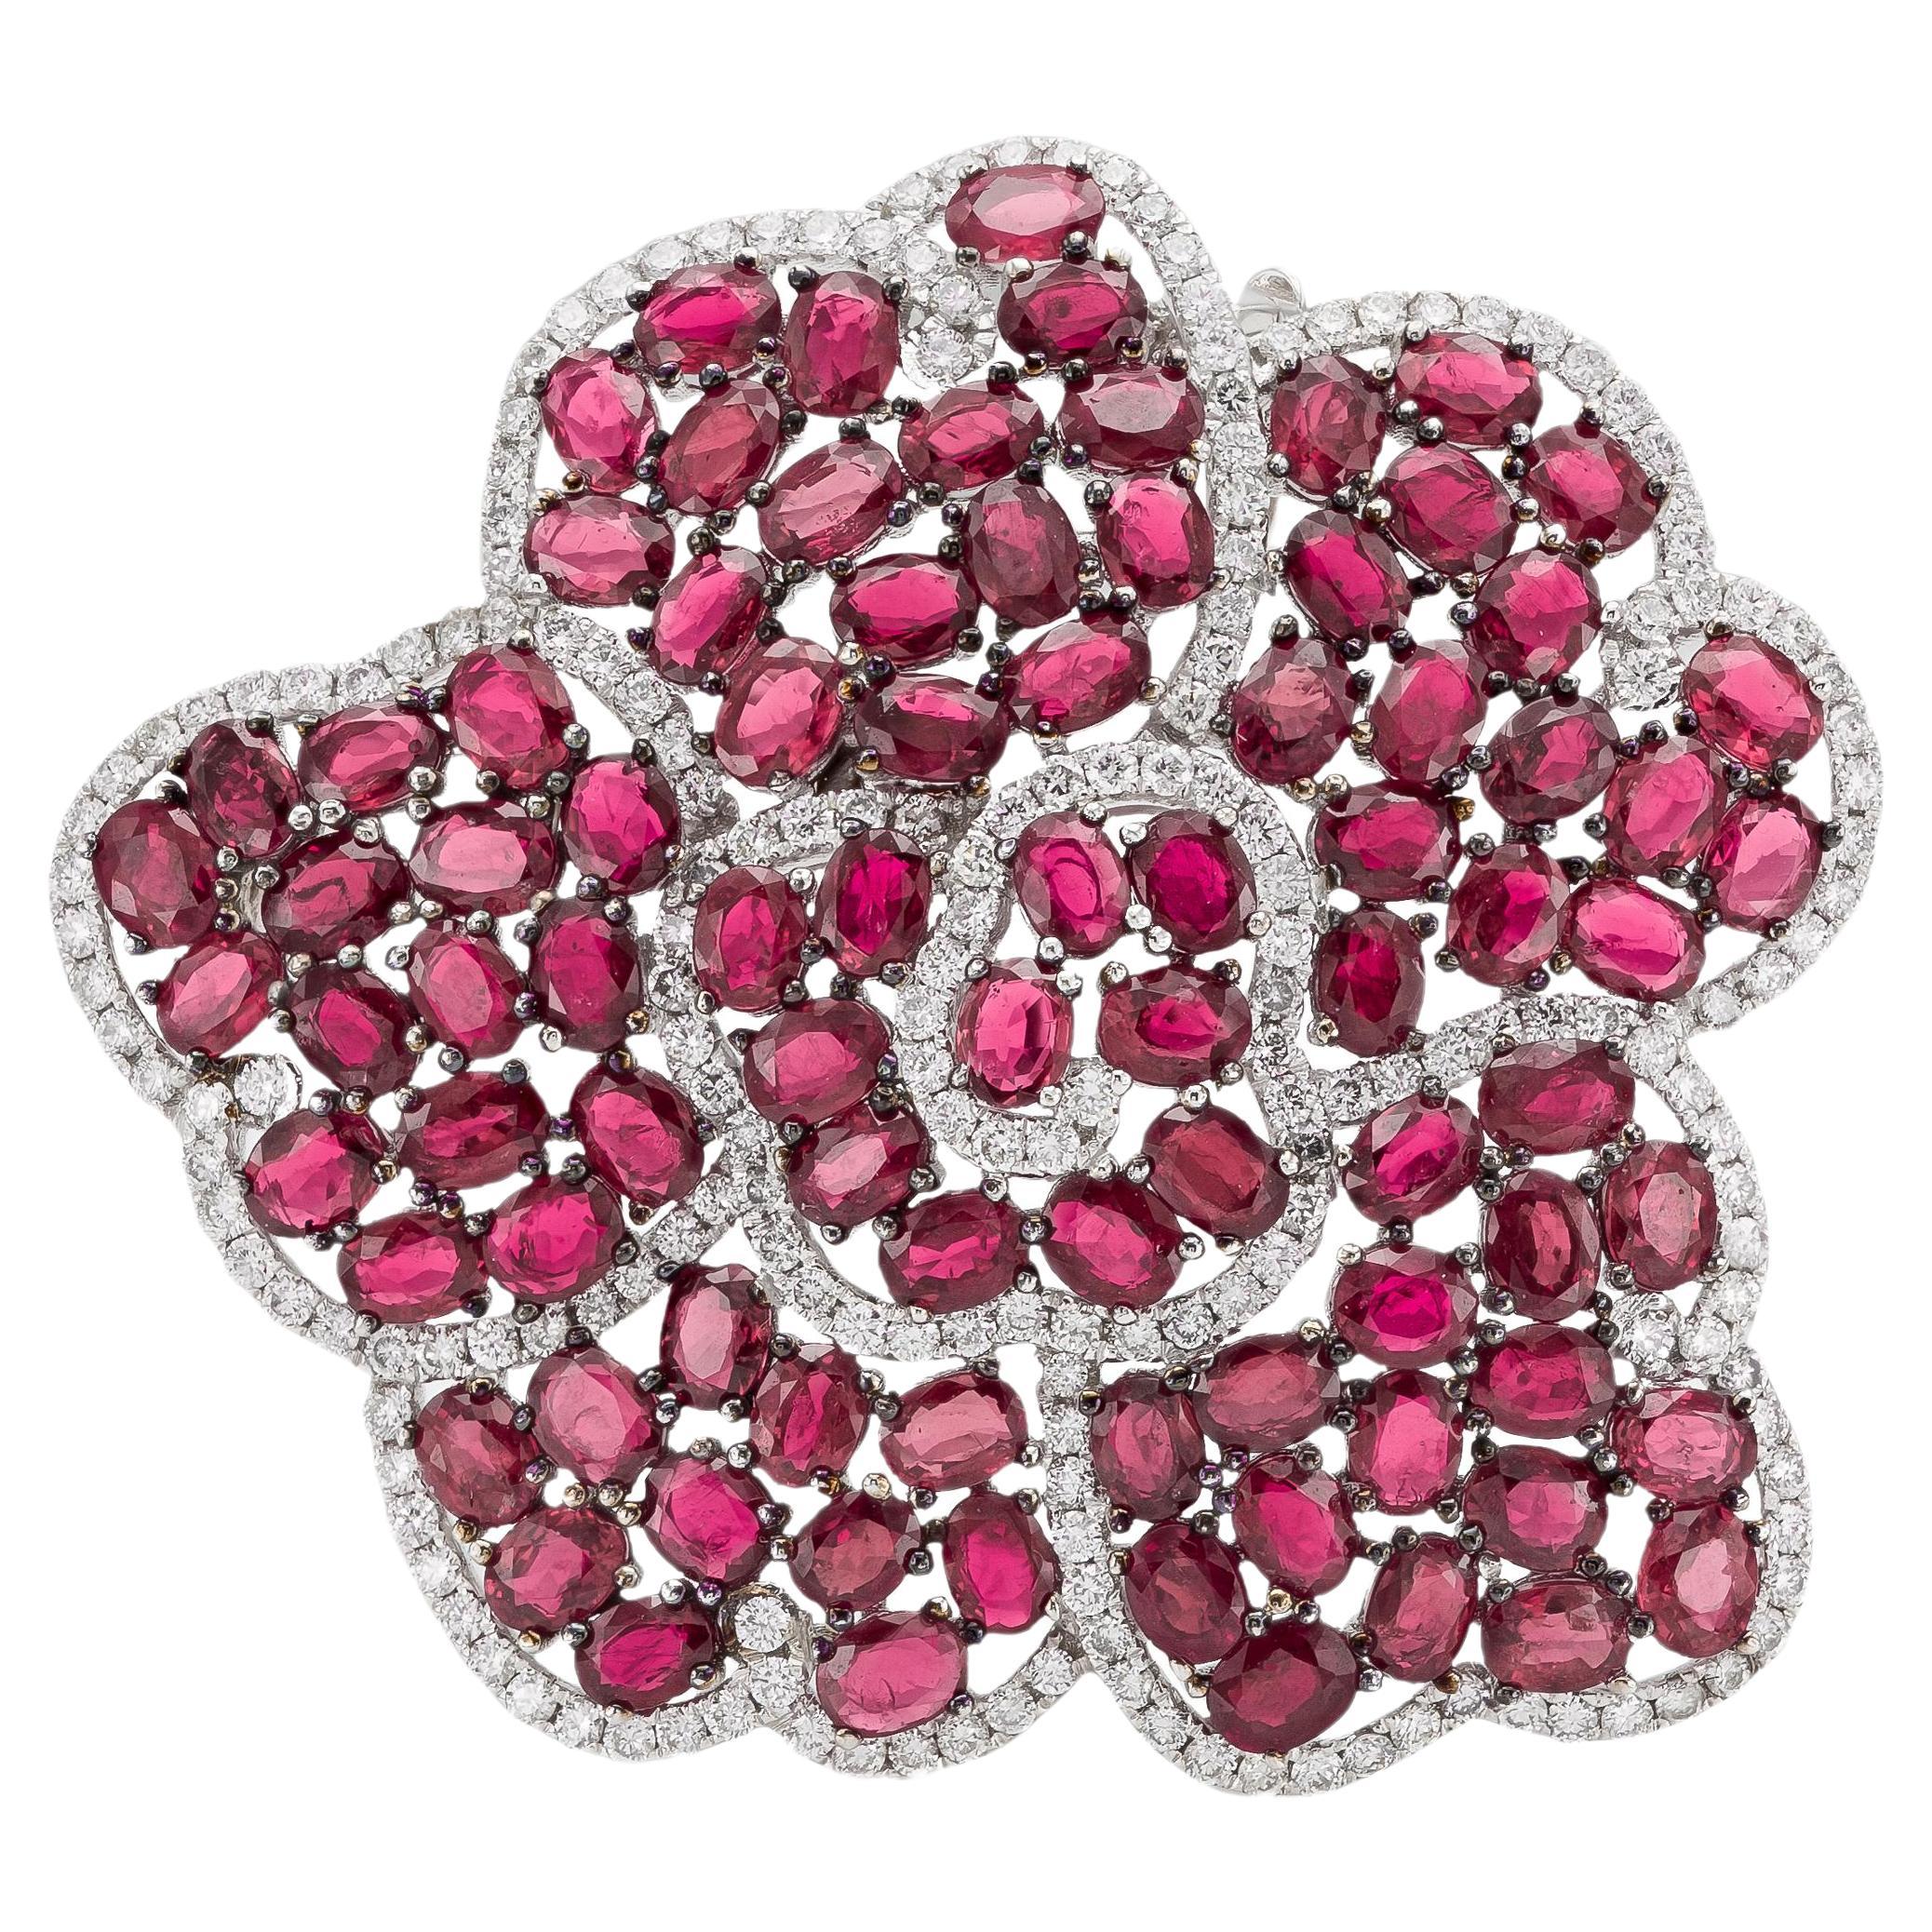 21.26 Carat Ruby and Diamonds Flower Brooch Pendant For Sale